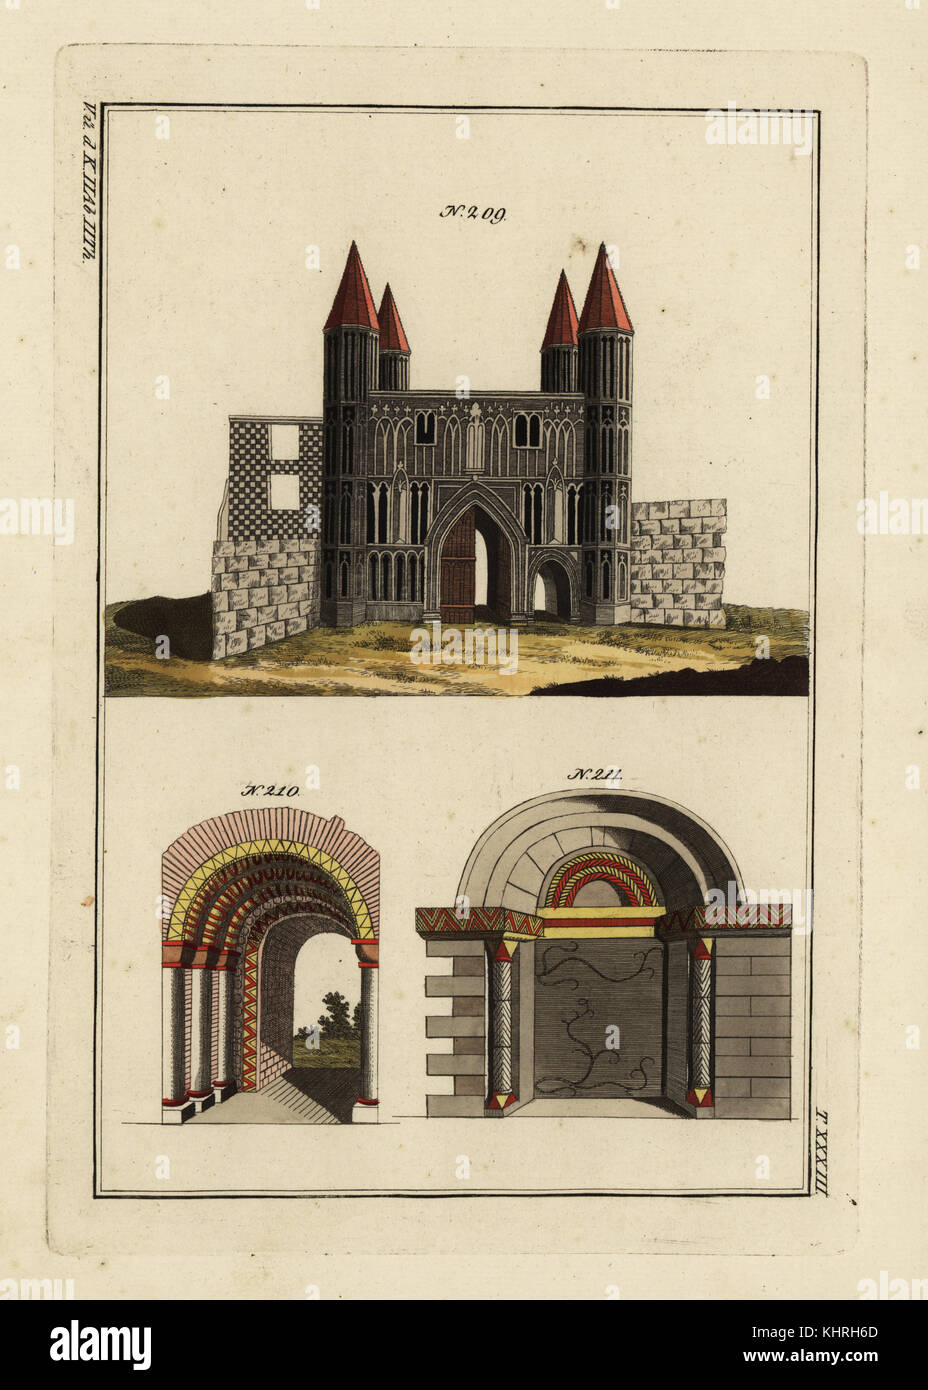 Gatehouse to St. John's Abbey or Colchester Abbey 209, archway to St. Botolph's Priory 210, and arch St. Margaret's church, Tanfield, Essex 211. Handcoloured copperplate engraving from Robert von Spalart's Historical Picture of the Costumes of the Principal People of Antiquity and of the Middle Ages, Chez Collignon, Metz, 1810. Stock Photo